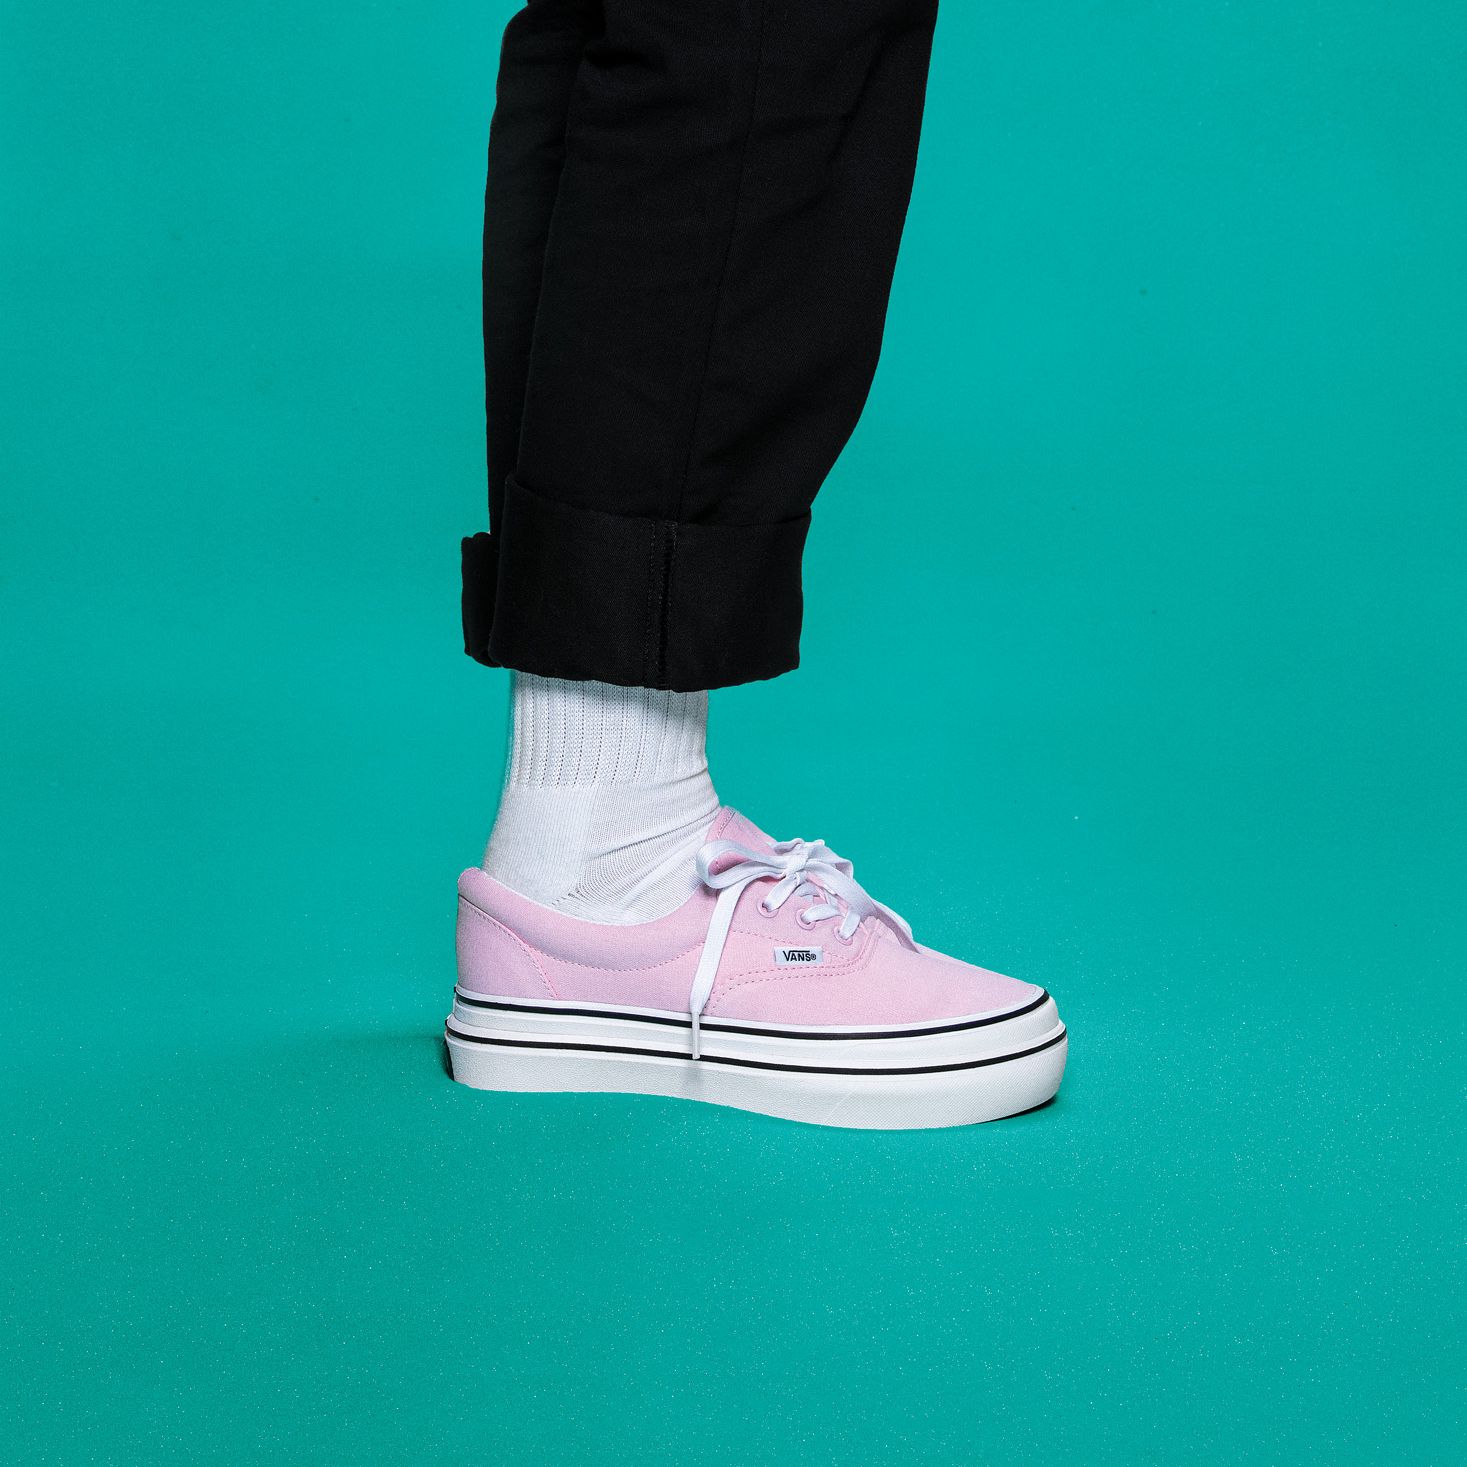 Vans on Twitter: "Have twice the fun with the Super ComfyCush Era,  featuring a double outsole for a super comfy platform. Shop or find a store  near you at https://t.co/oAIkFfumwU https://t.co/LQTwEMHndR" /